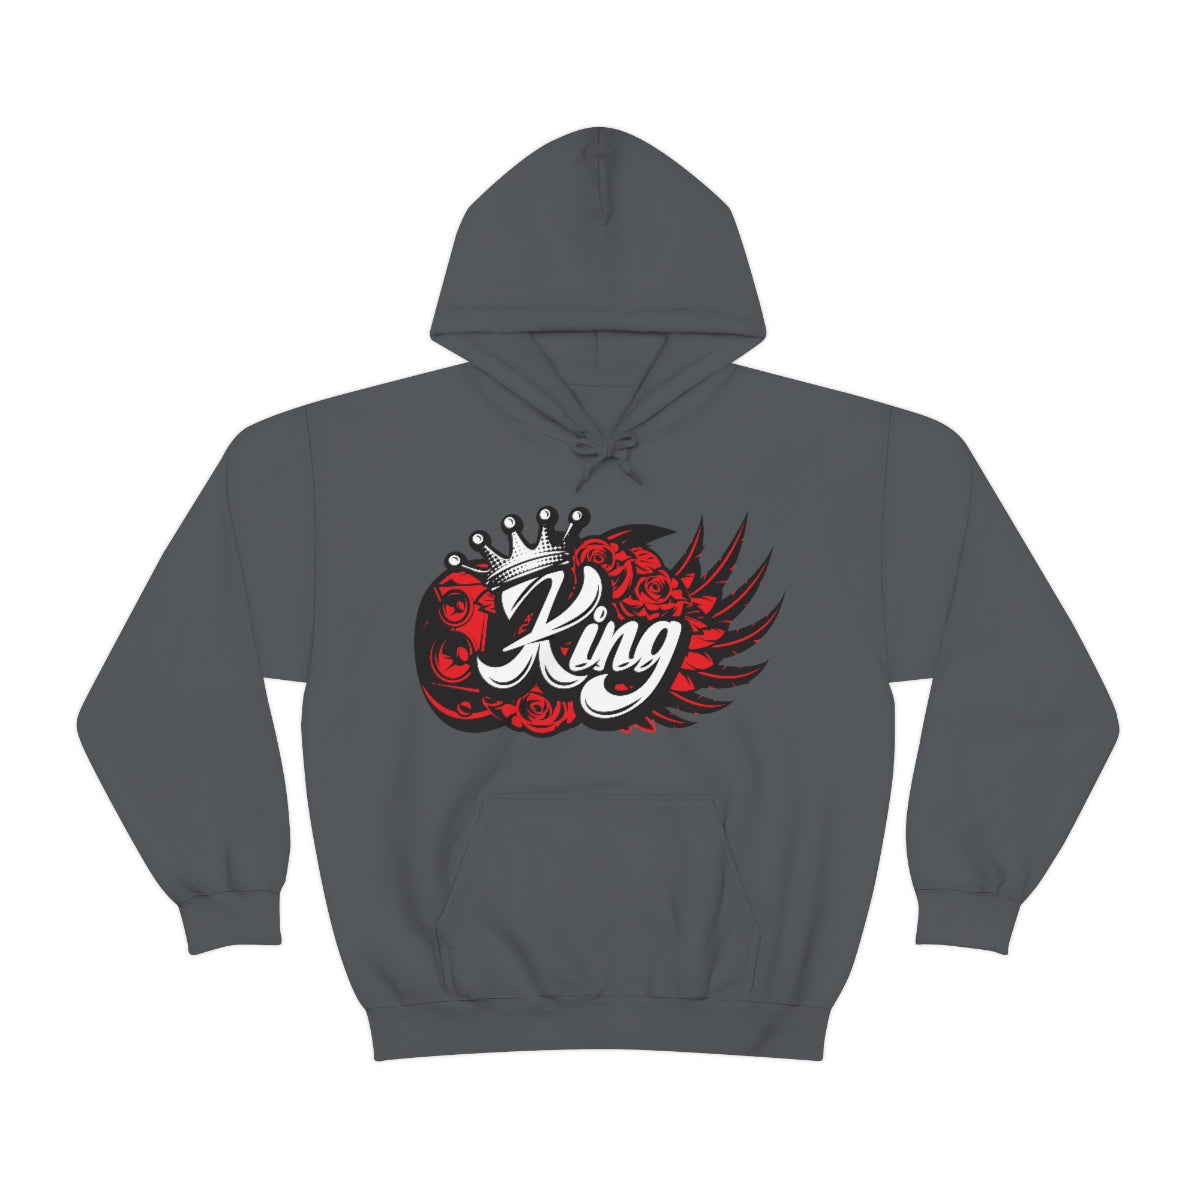 "King" Hoodie (Available in Multiple Colors)